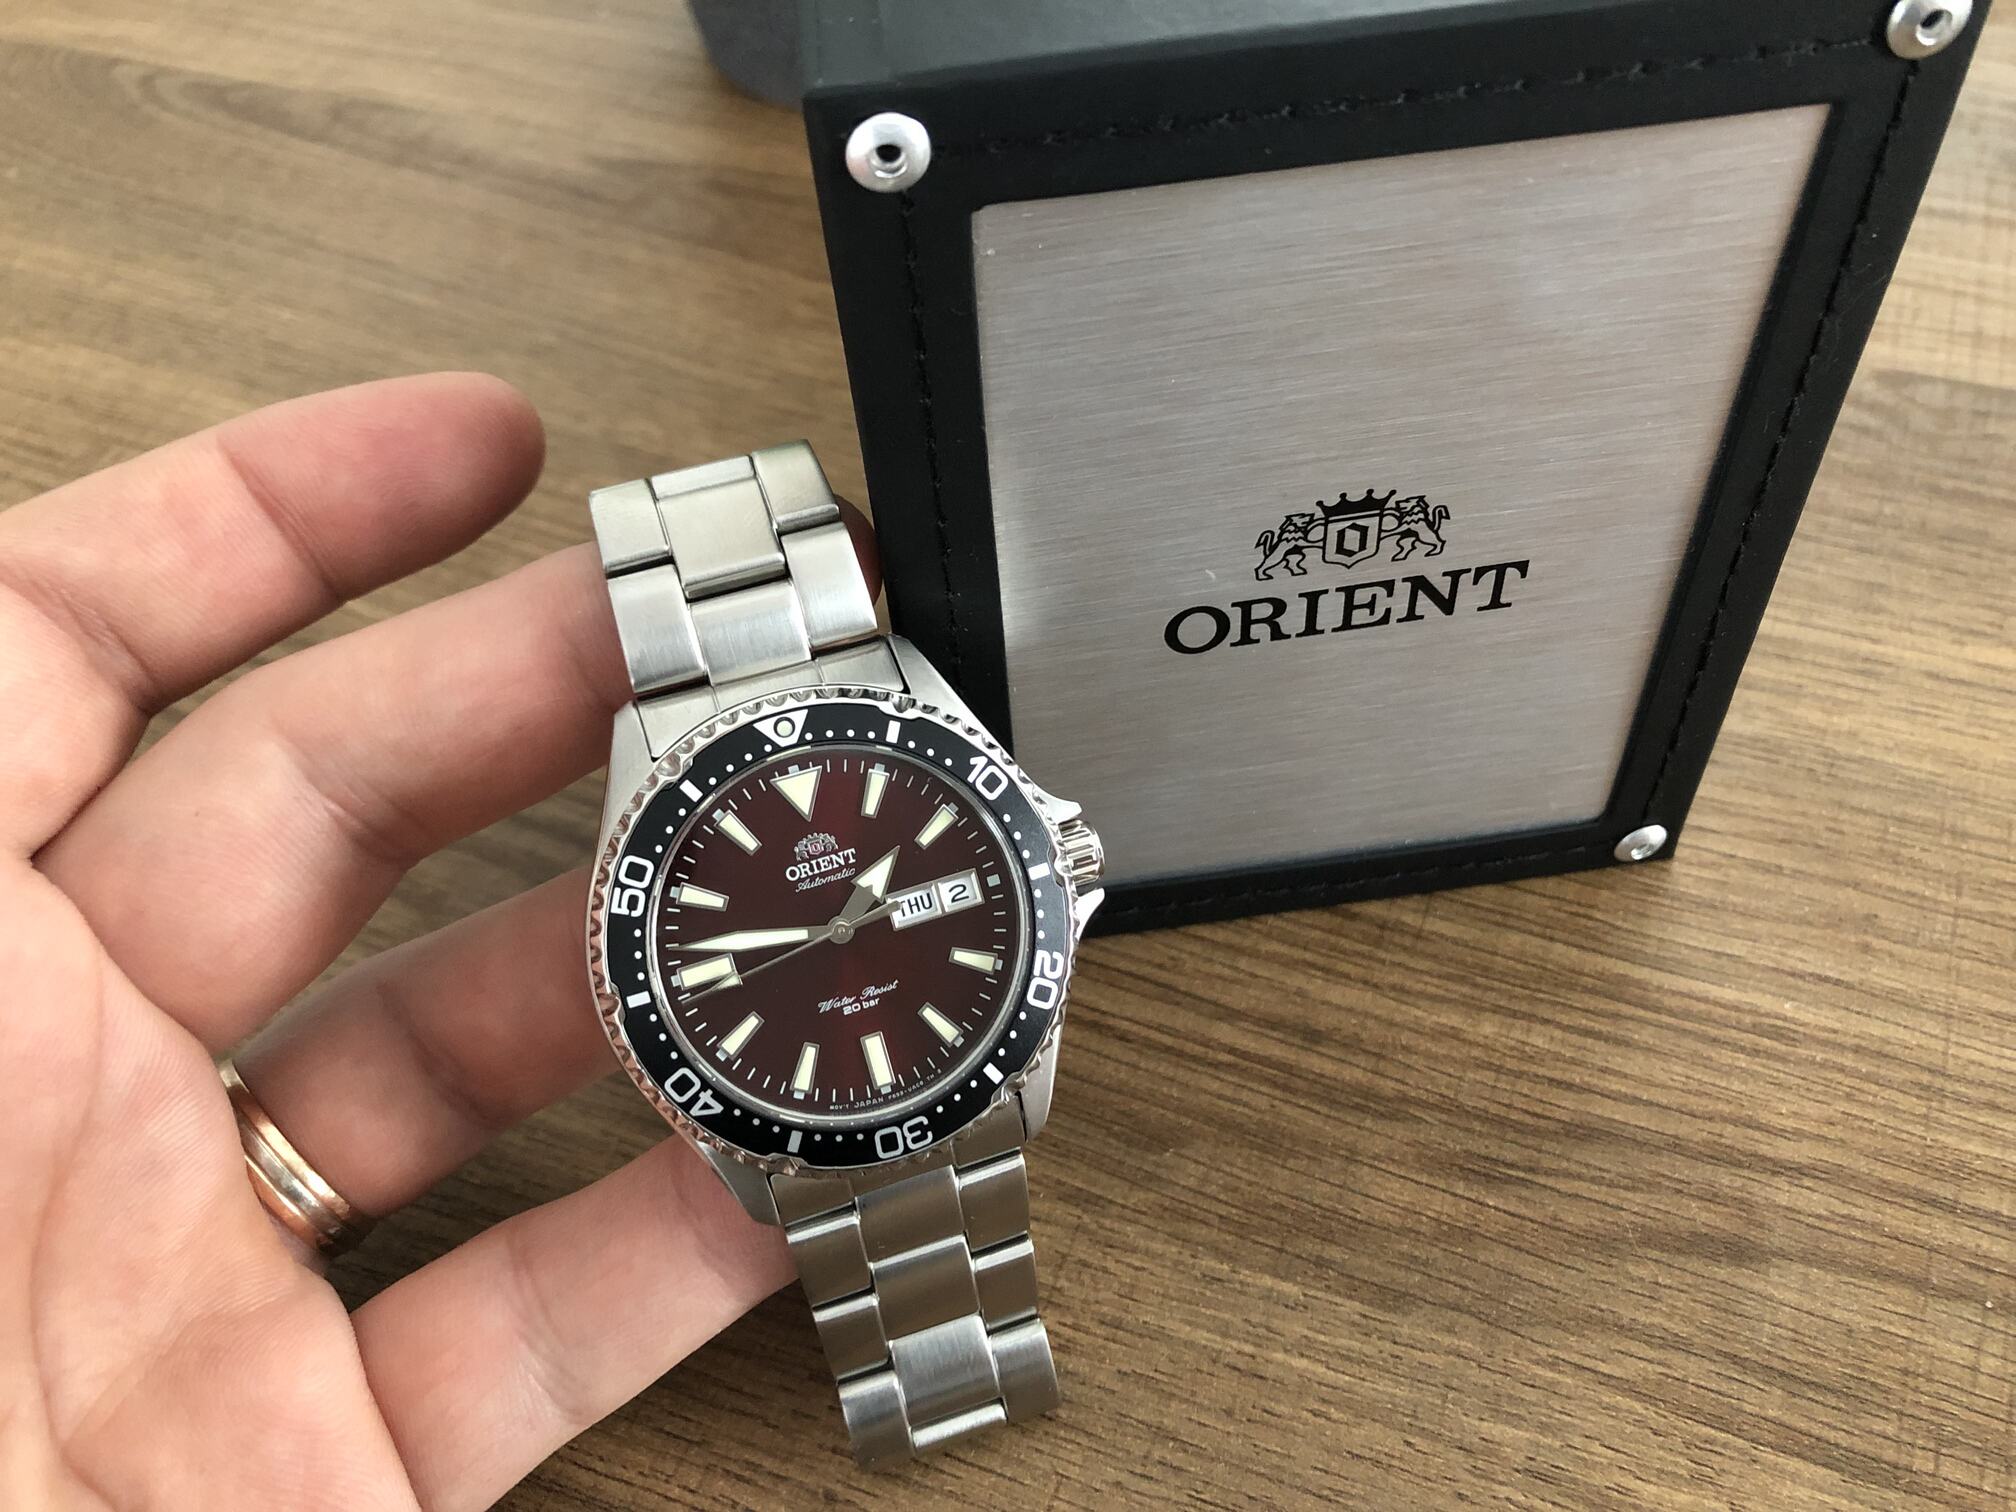 Orient watch with a box next to it